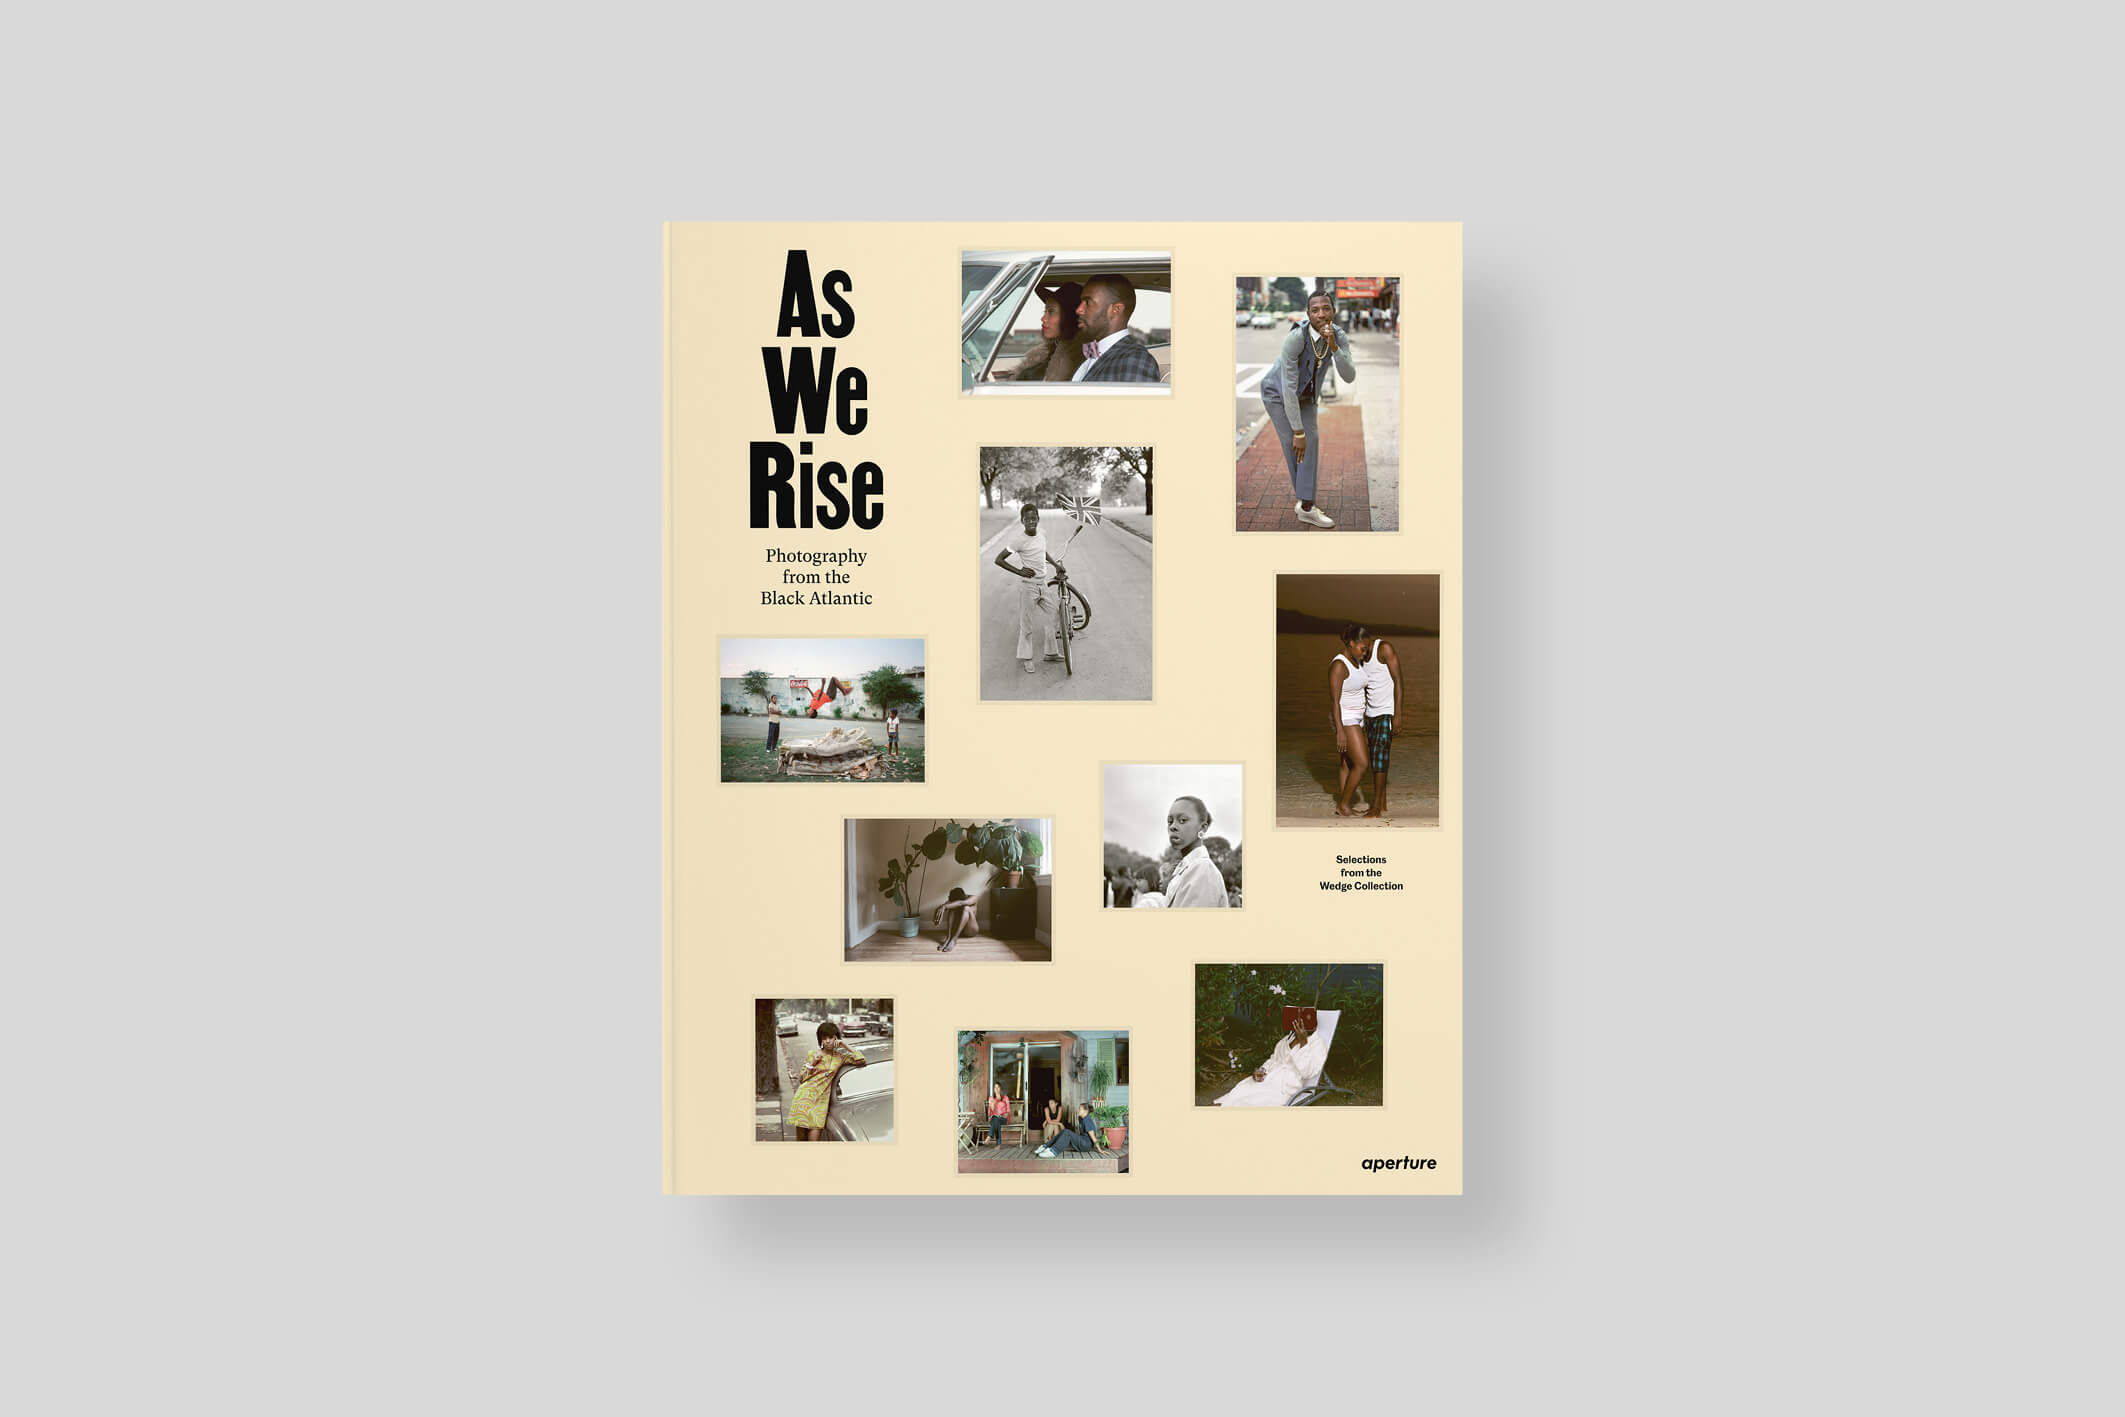 As-we-rise-photography-from-the-black-atlantic_Aperture_cover